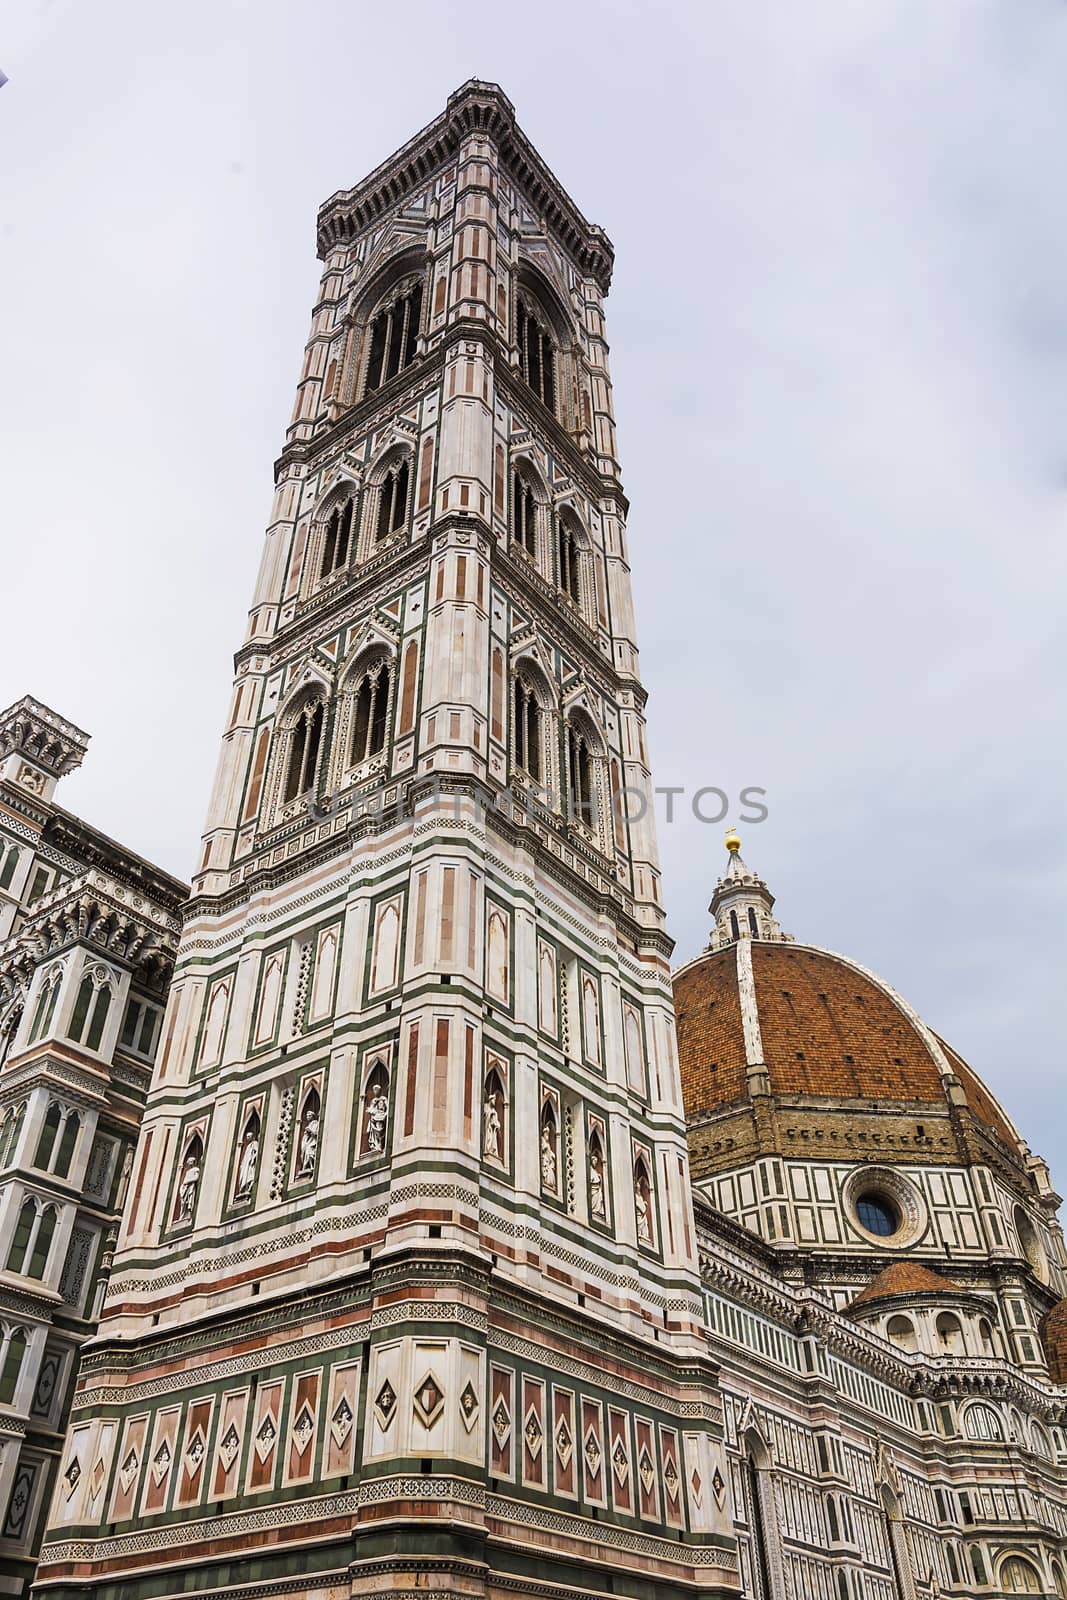 Duomo Santa Maria Del Fiore and Giotto belfry Campanile in Florence, Italy in a cloudy day